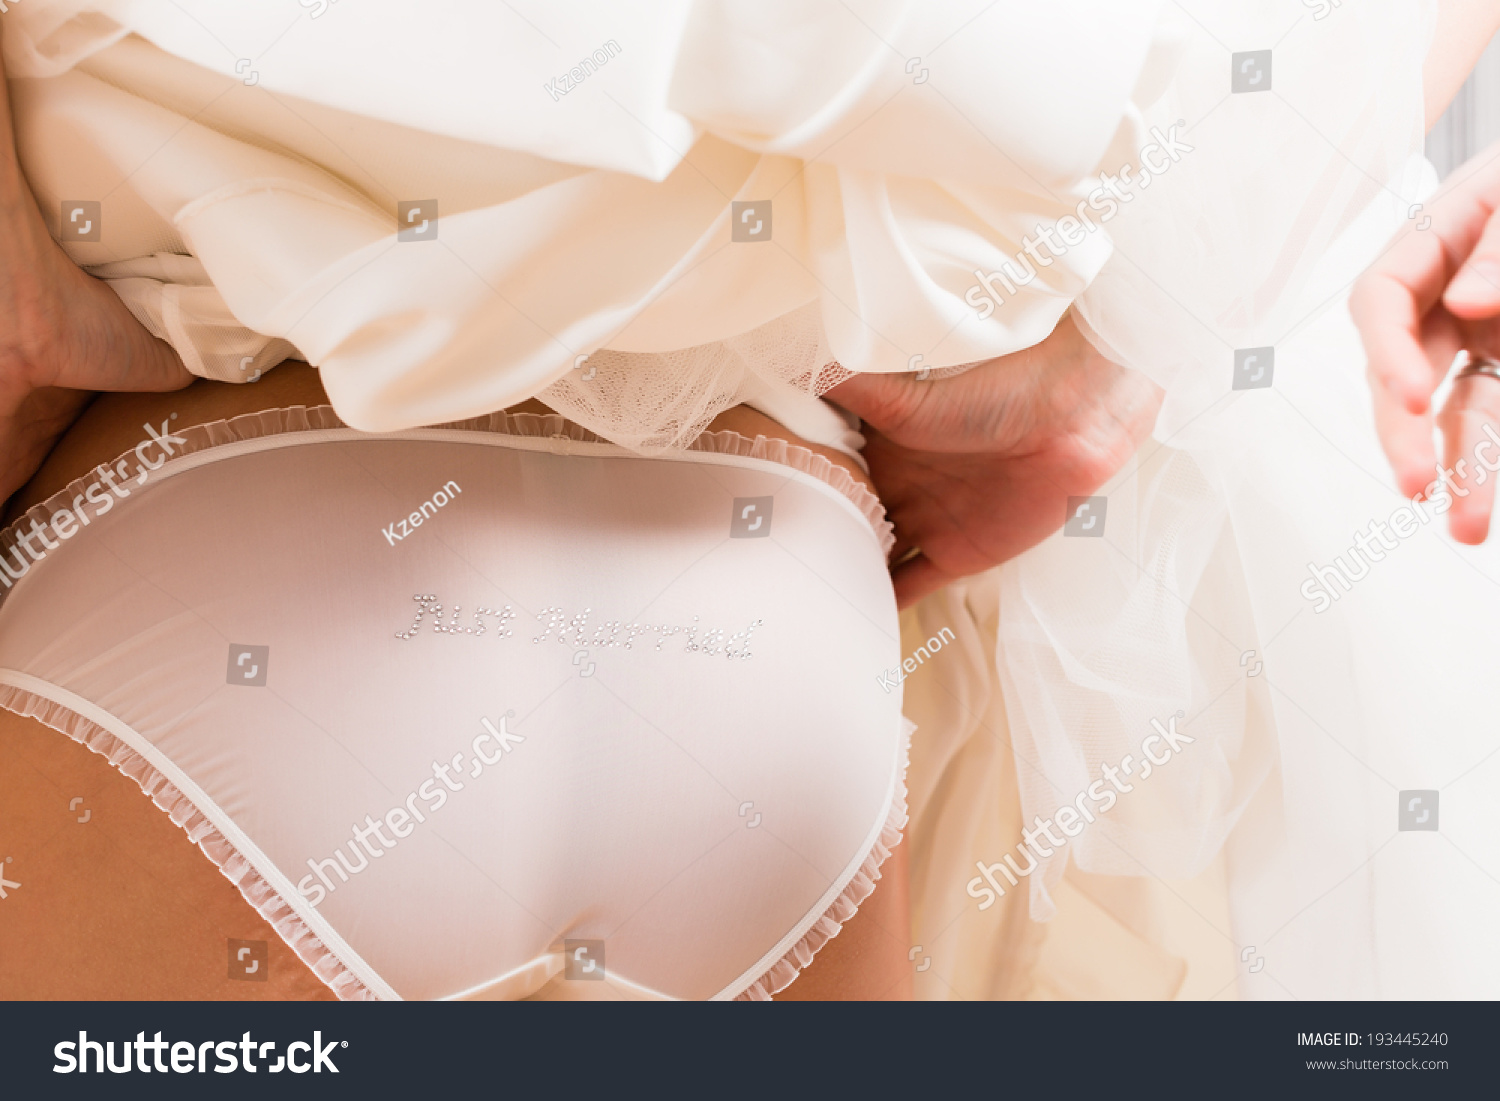 Girl With Panties Showing Images